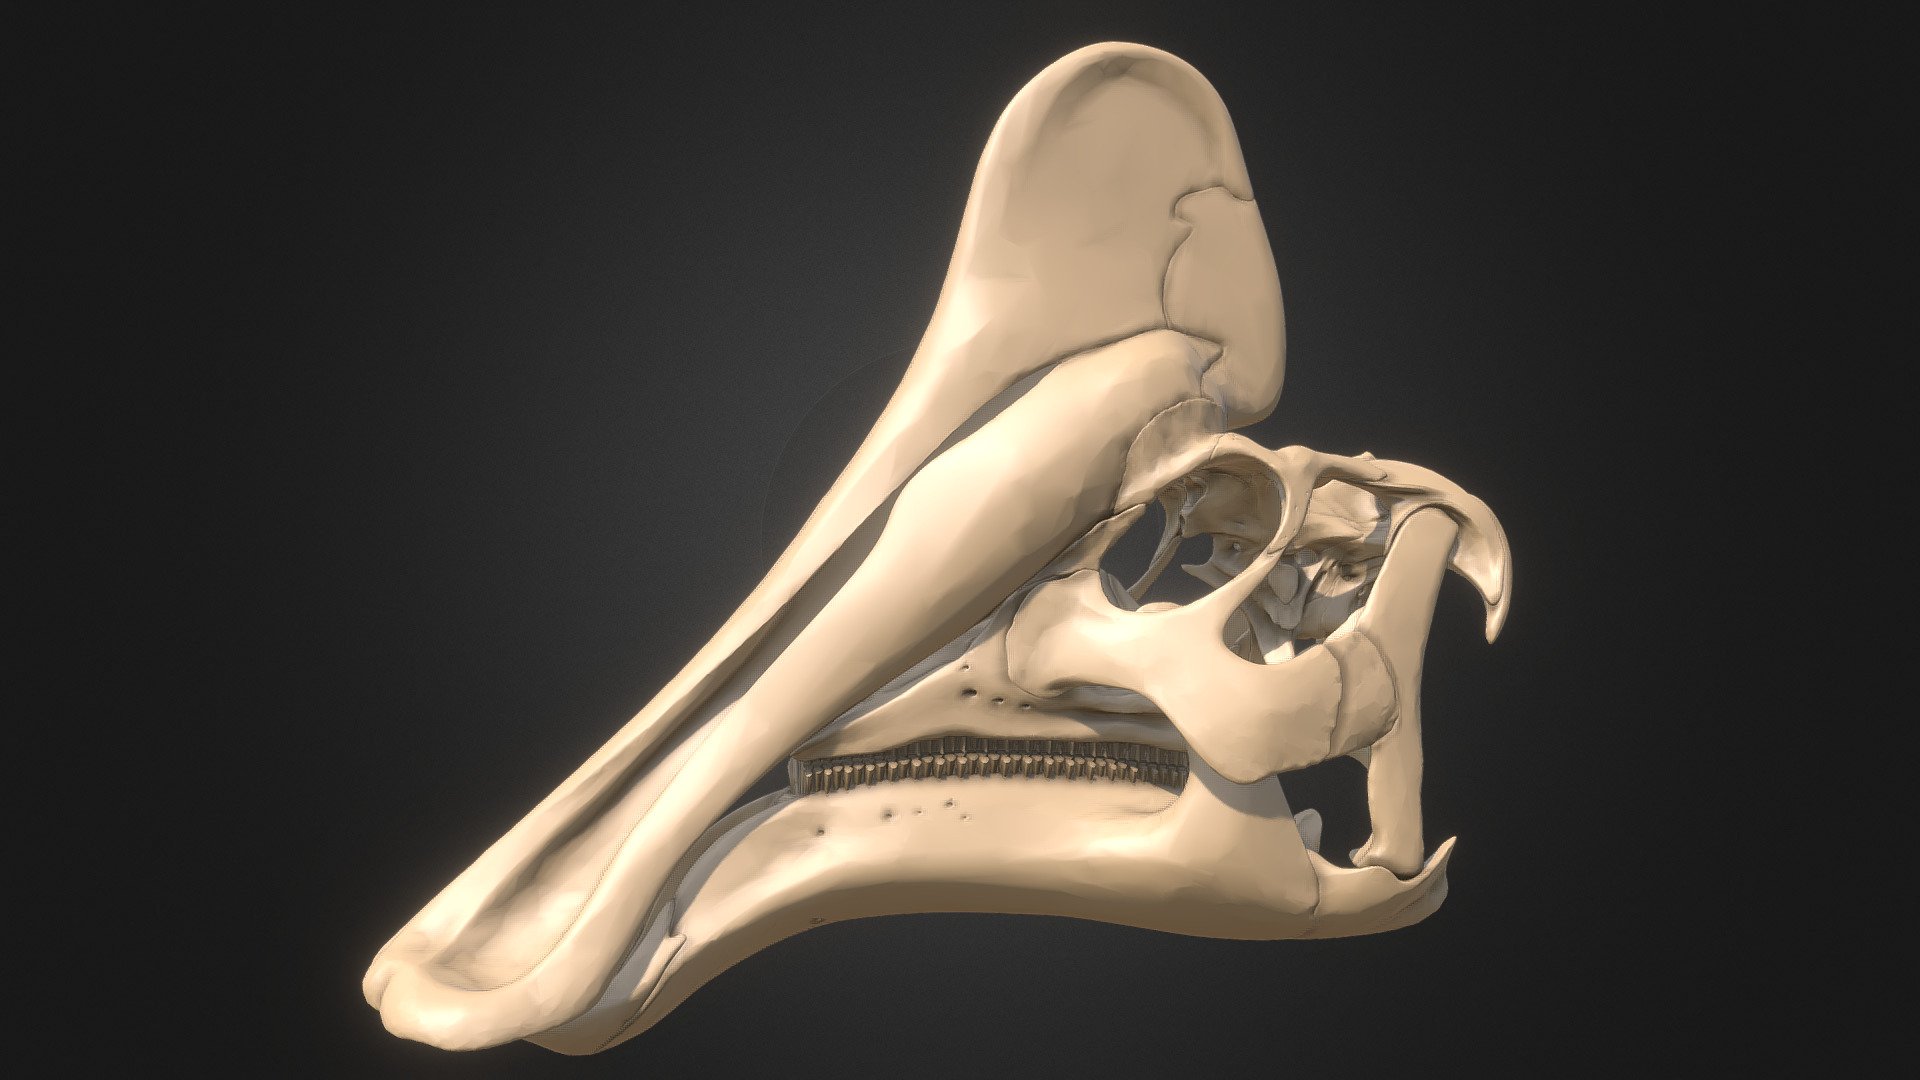 Digital sculpture of an Amurosaurus riabinini skull. Amurosaurus is a lambeosaurine hadrosaur from far eastern Russia. It was named after the Amur river. It is found in the Udurchukan Formation.

Цифровая скульптура черепа Amurosaurus riabinini. Амурозавр — гадрозавр-ламбеозавр из дальневосточной России. Он был назван в честь реки Амур. Встречается в удурчуканской свите.

I've done my best to make this as accurate as possible. I had to compare a whole lot of reference material. Not everything is known on the skull of Amurosaurus. So, for bones that were unknown I've reference other hadrosaurs such as Parasaurolophus, Kazaklambia, Corythosaurus, Hypacrosaurus, Canardia and also saurolophine hadrosaurs like Saurolophus and Edmontosaurus.
Even museum mounts often do not reconstruct bones like the pterygoids, palatines and vomers due to those bones being generally fragile and not fossilising that often. So they are often incompletely known and hard to reconstruct 3d model